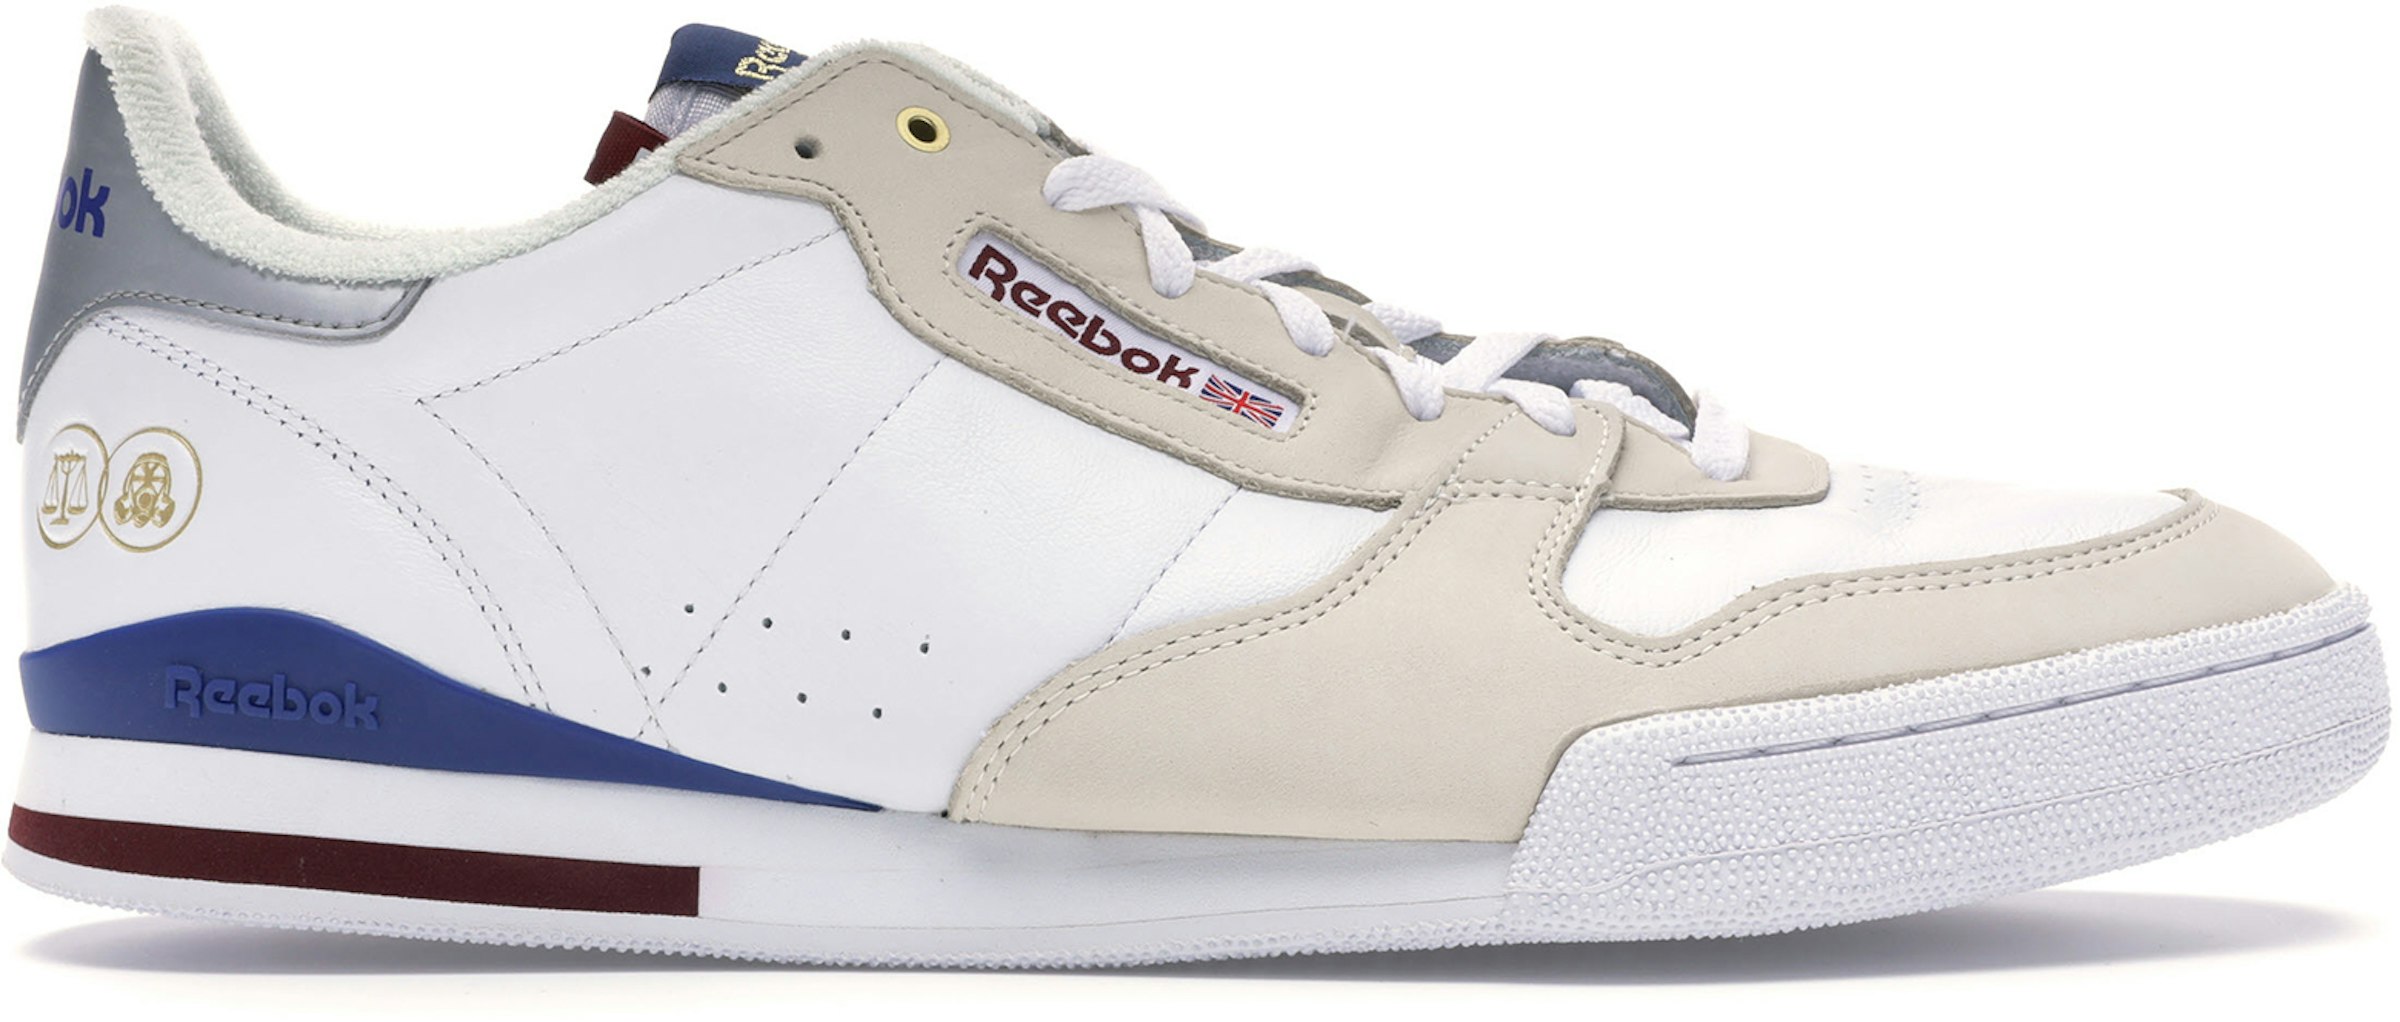 Reebok Phase 1 x Highs and Lows Common Youth Men's - CN6136 US